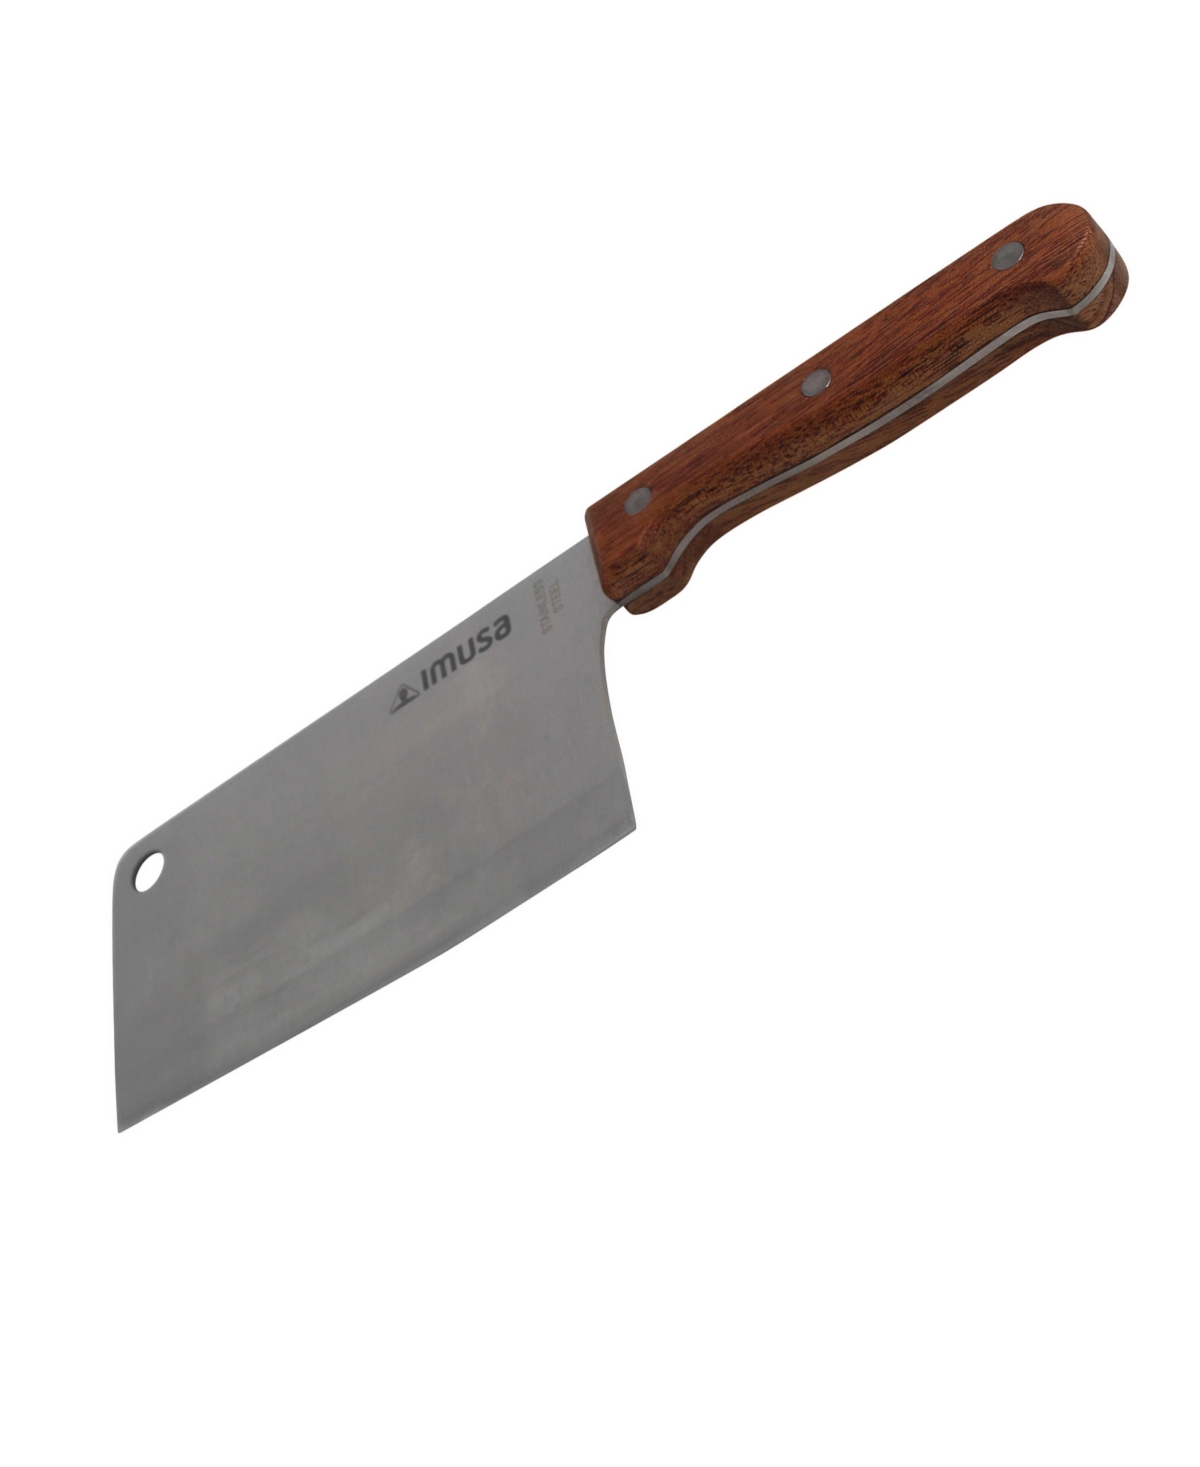 Imusa 0.80" Wooden Look Cleaver Knife In Stainless Steel